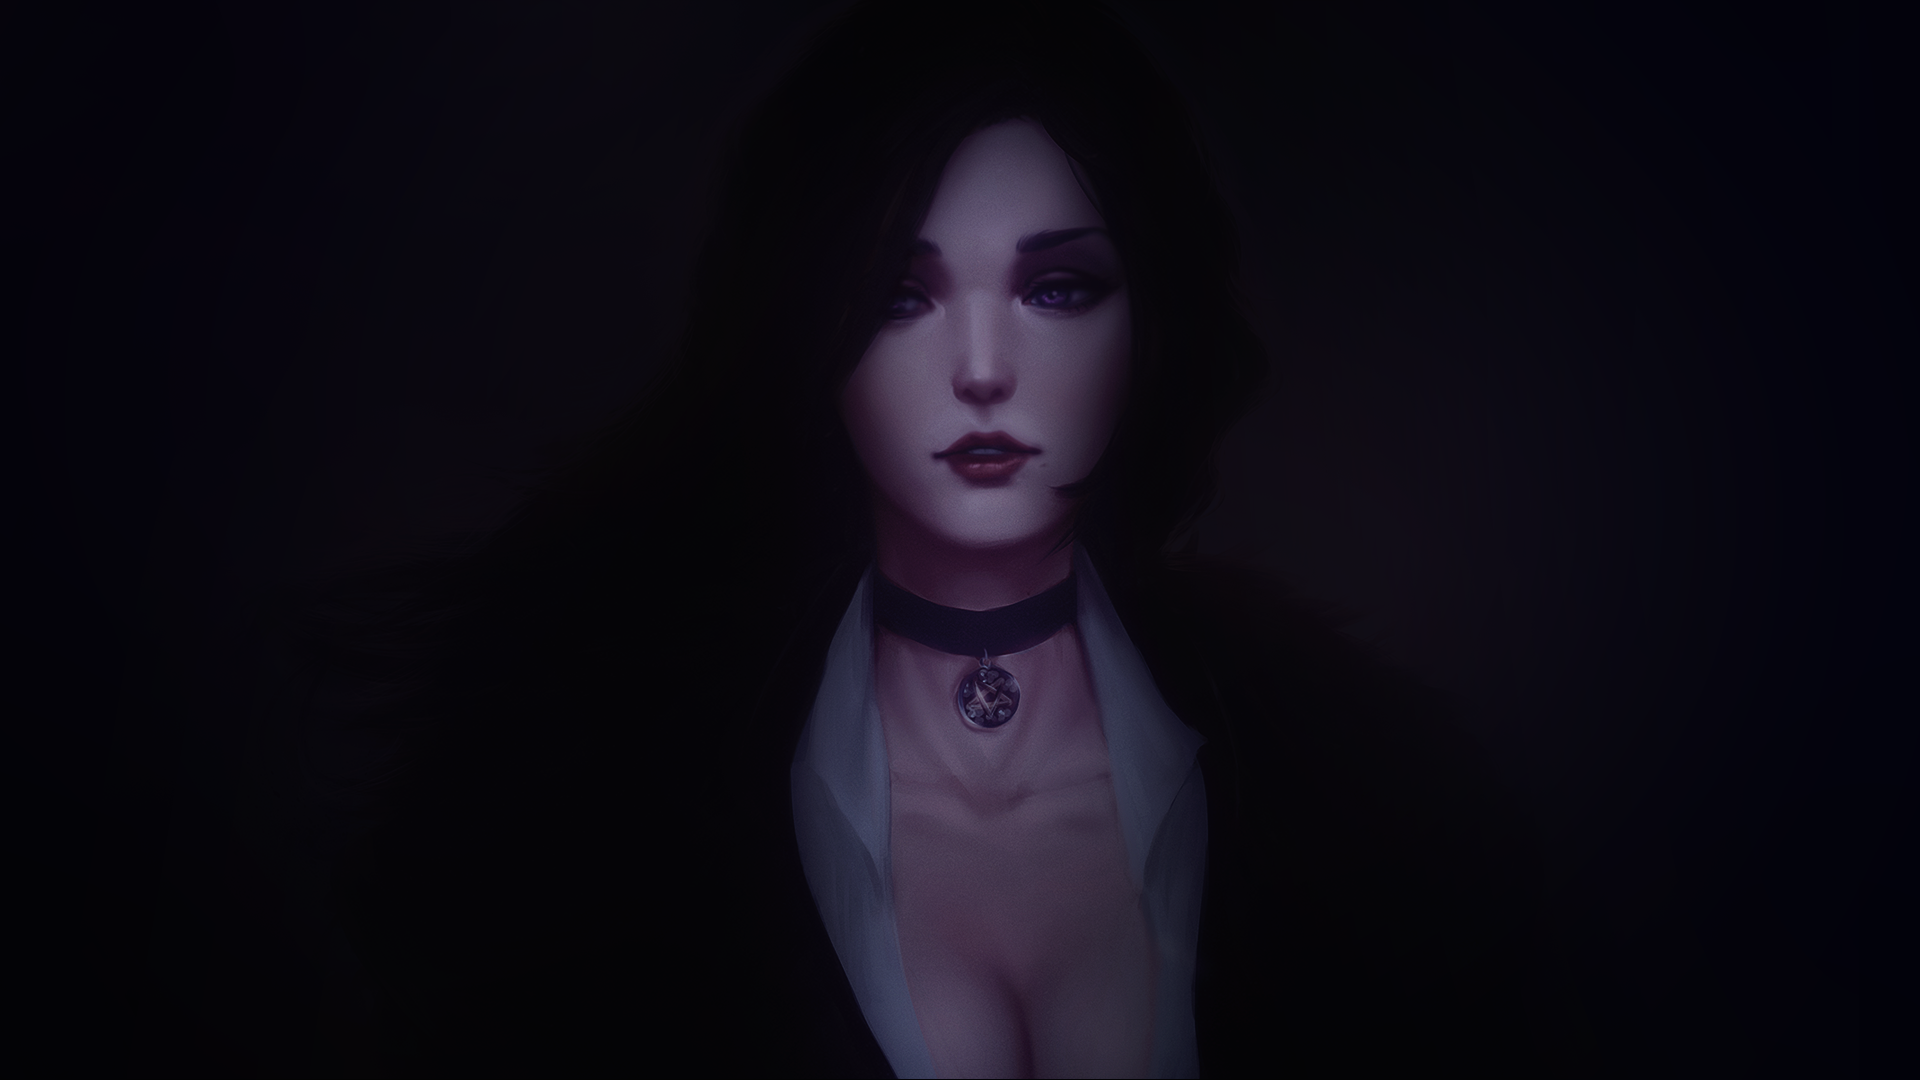 Yennefer Yennefer Of Vengerberg The Witcher The Witcher 3 Wild Hunt Frontal View 1920x1080